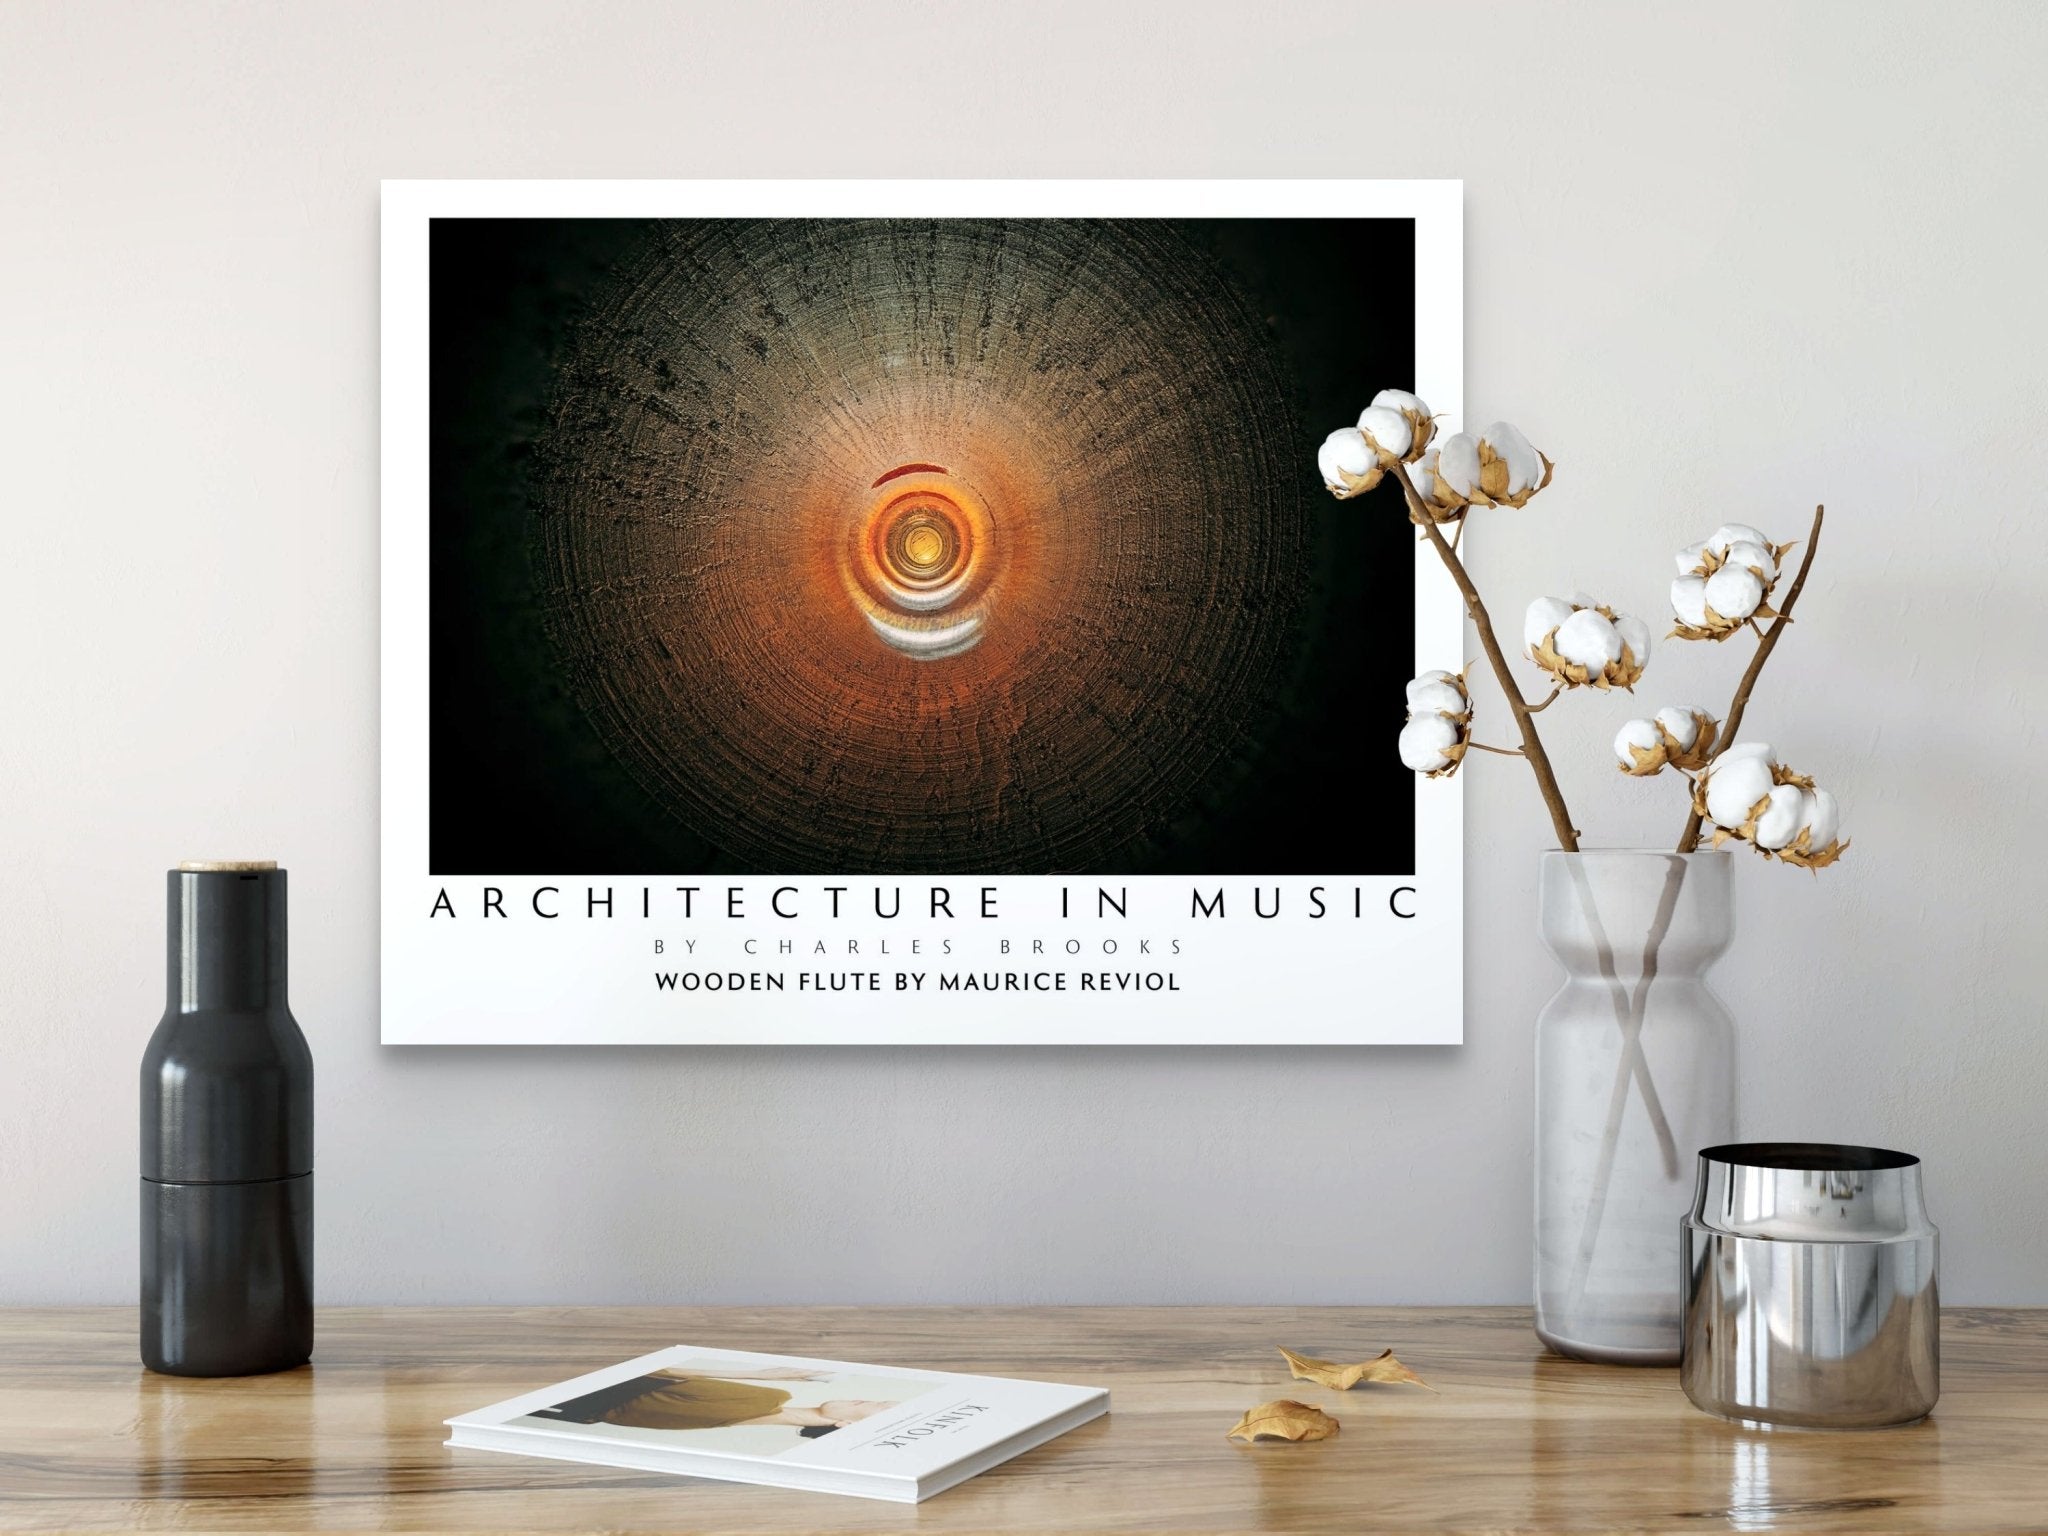 Photo of Fine Wooden Flute. High Quality Poster. - Giclée Poster Print - Architecture In Music